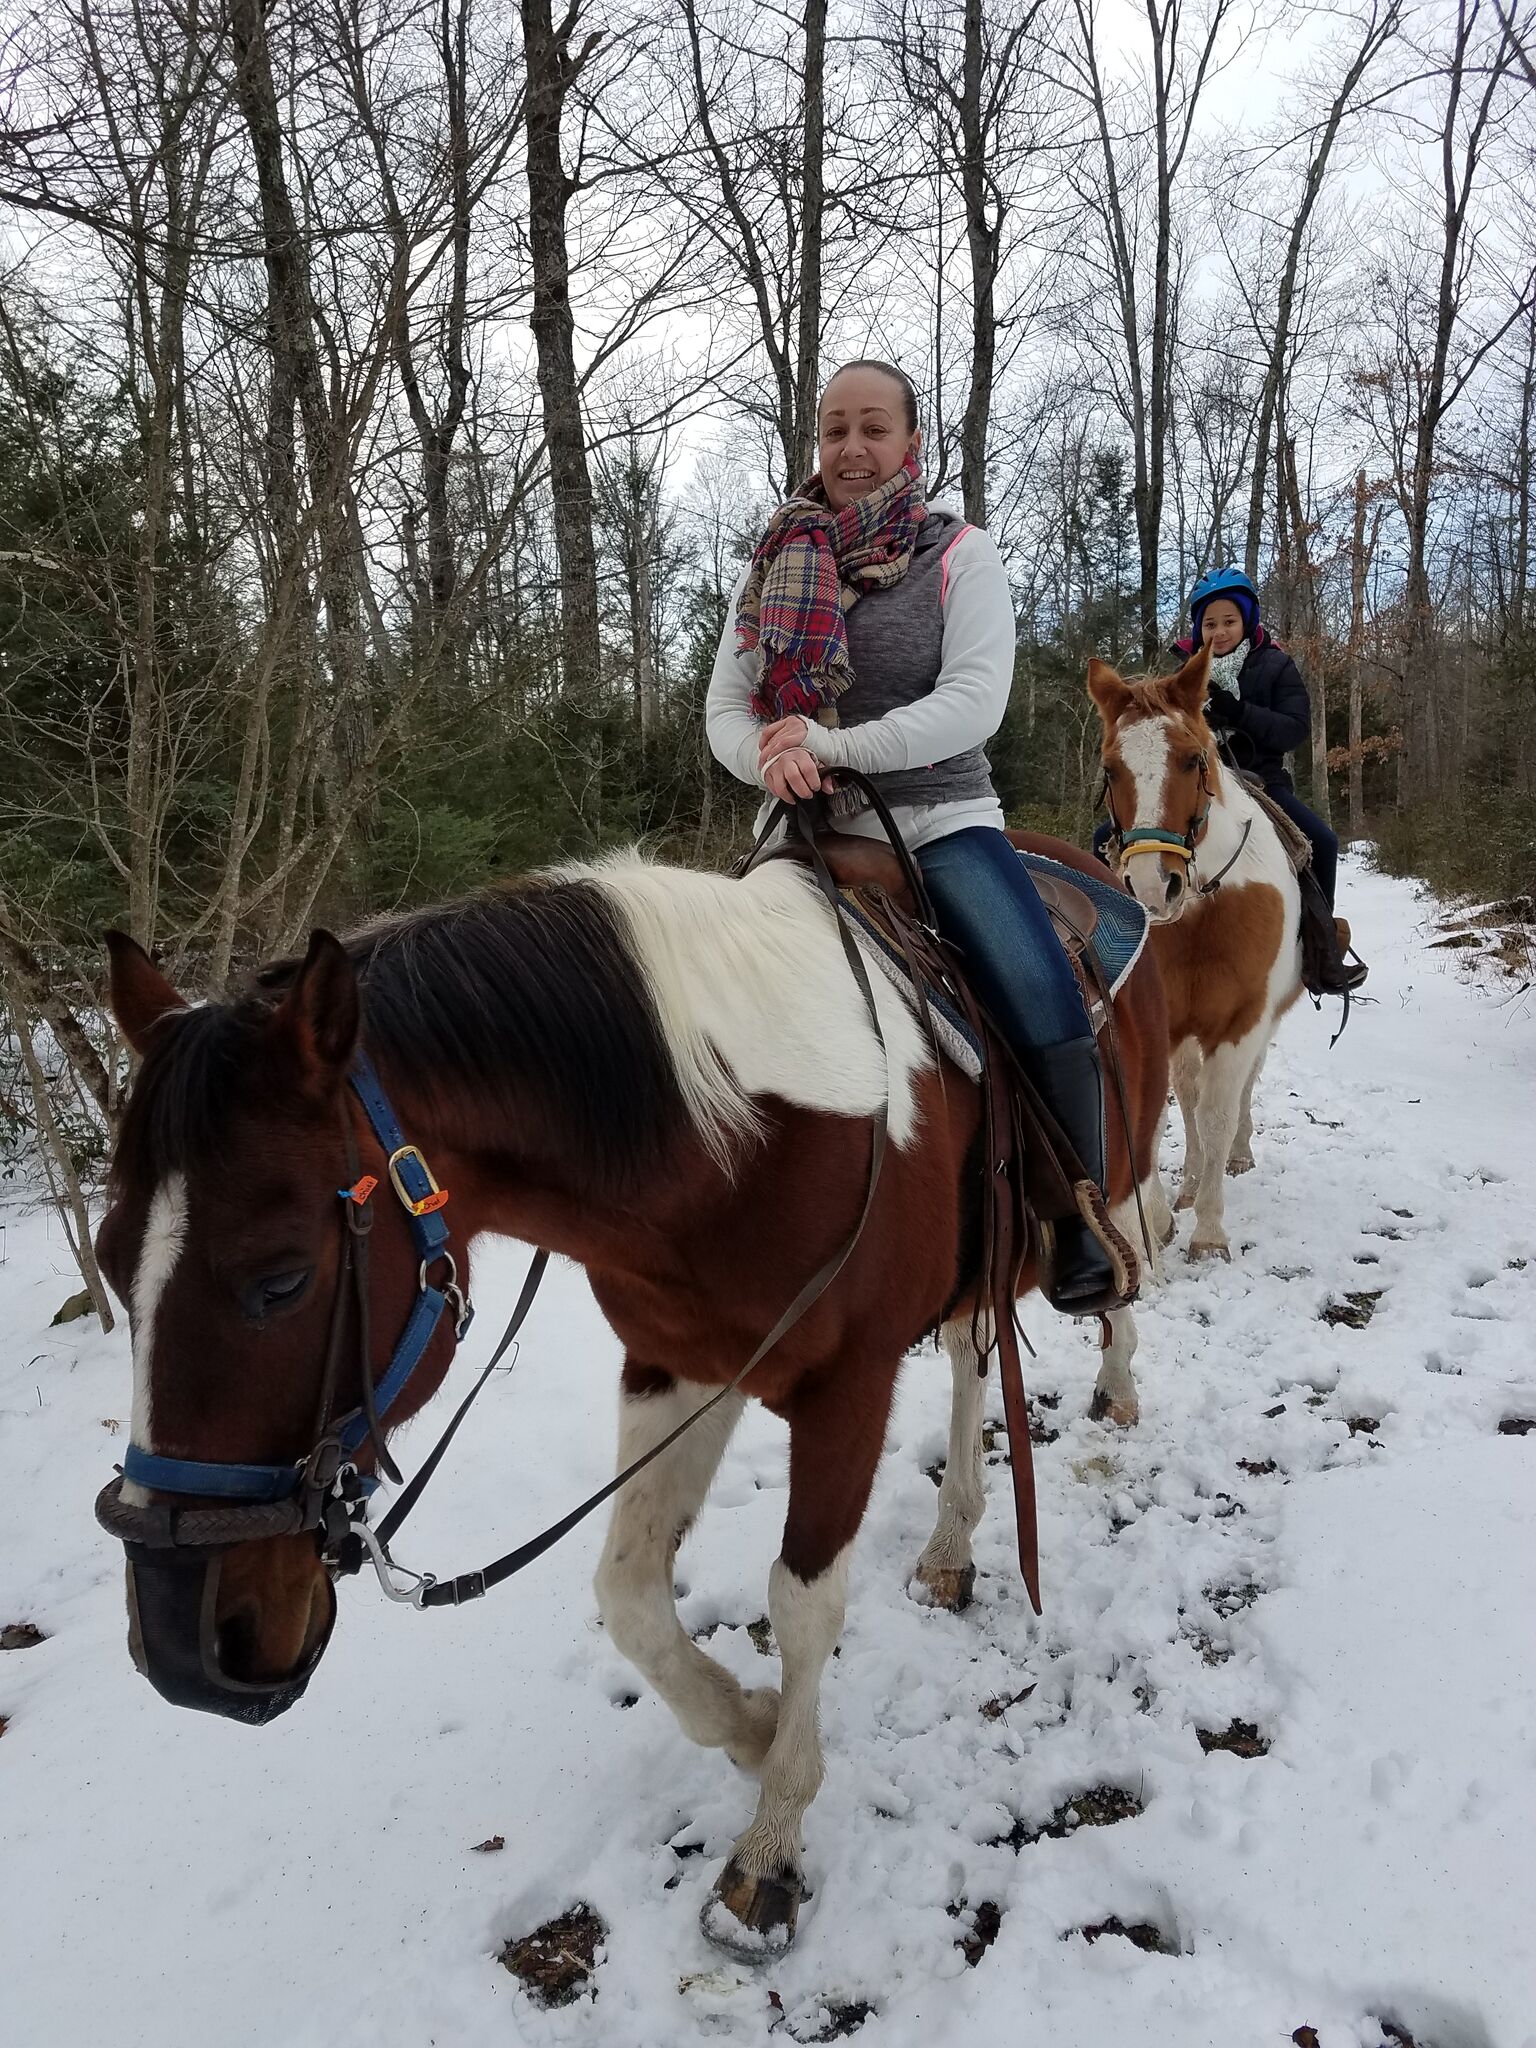 A woman horseback riding in the snow.